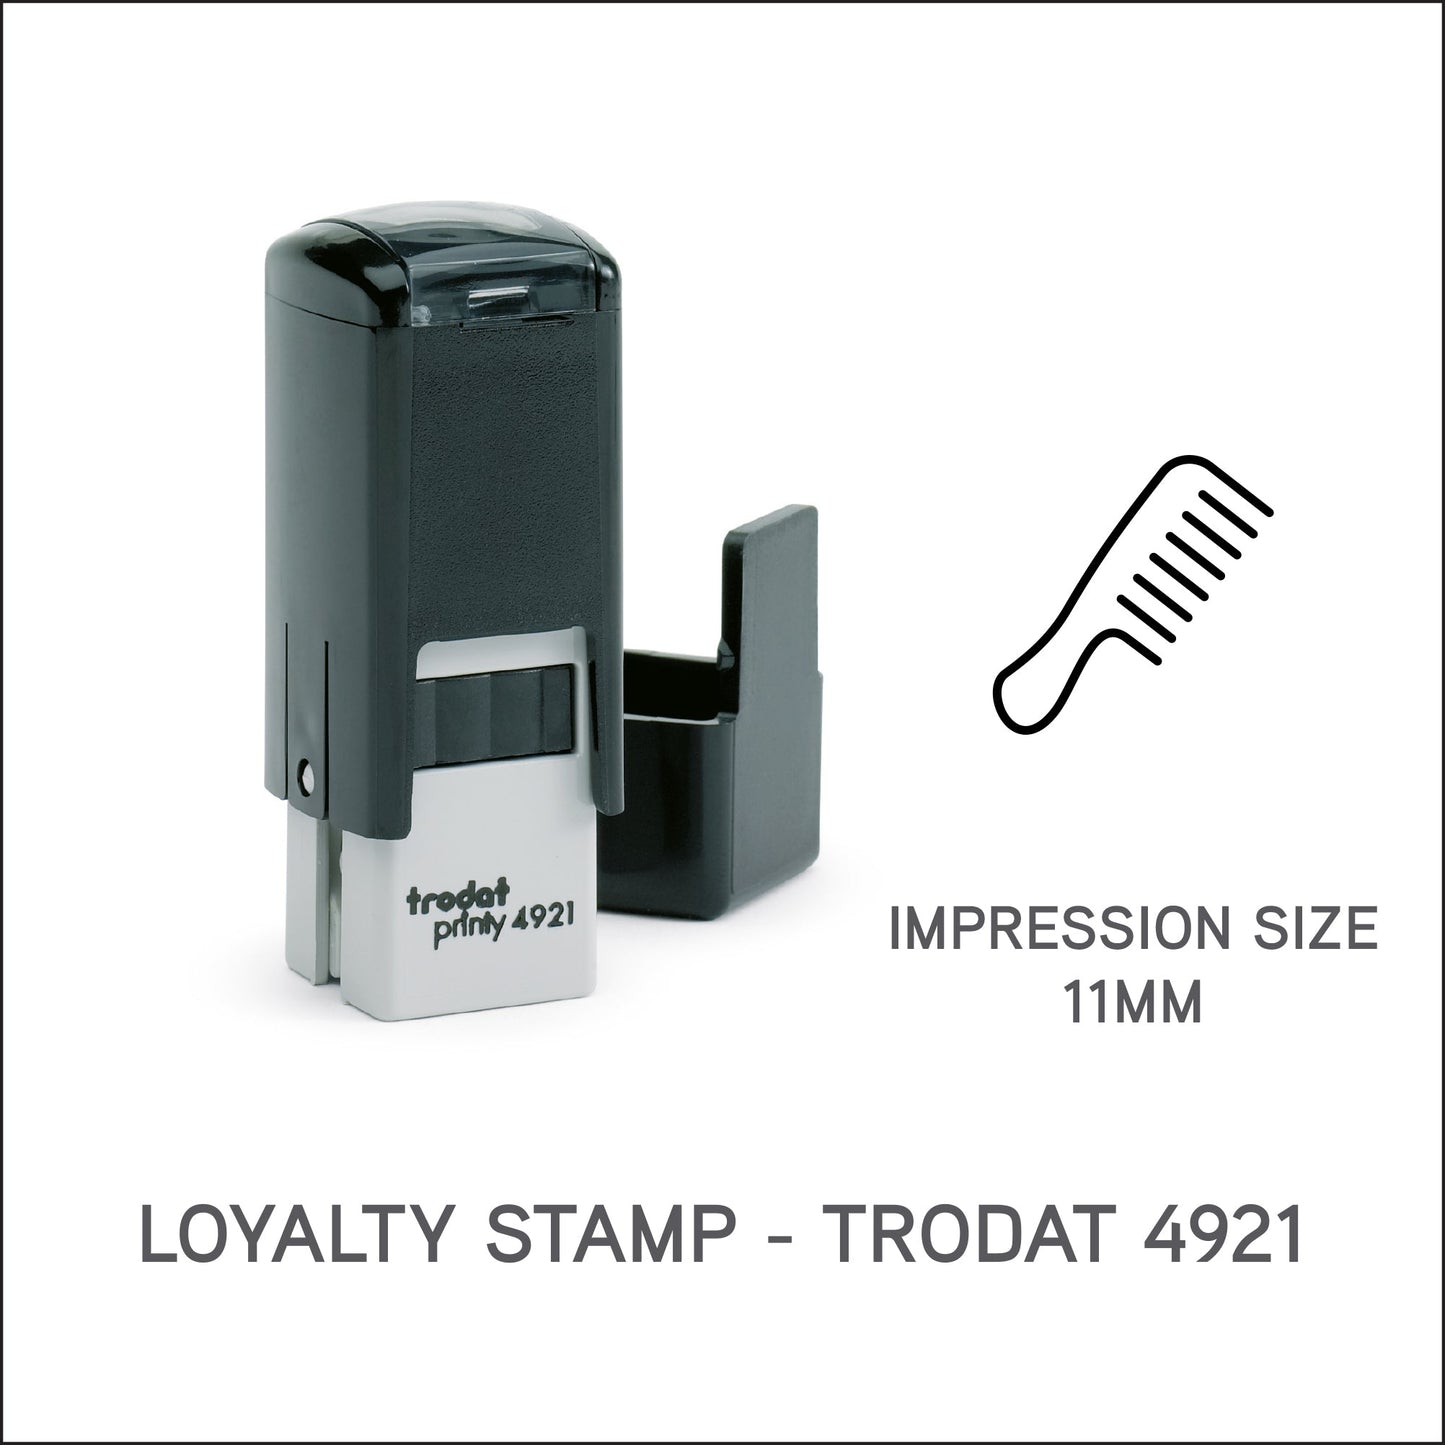 Comb - Barbers Loyalty Card Rubber Stamp - Trodat 4921 - 11mm x 11mm Impression